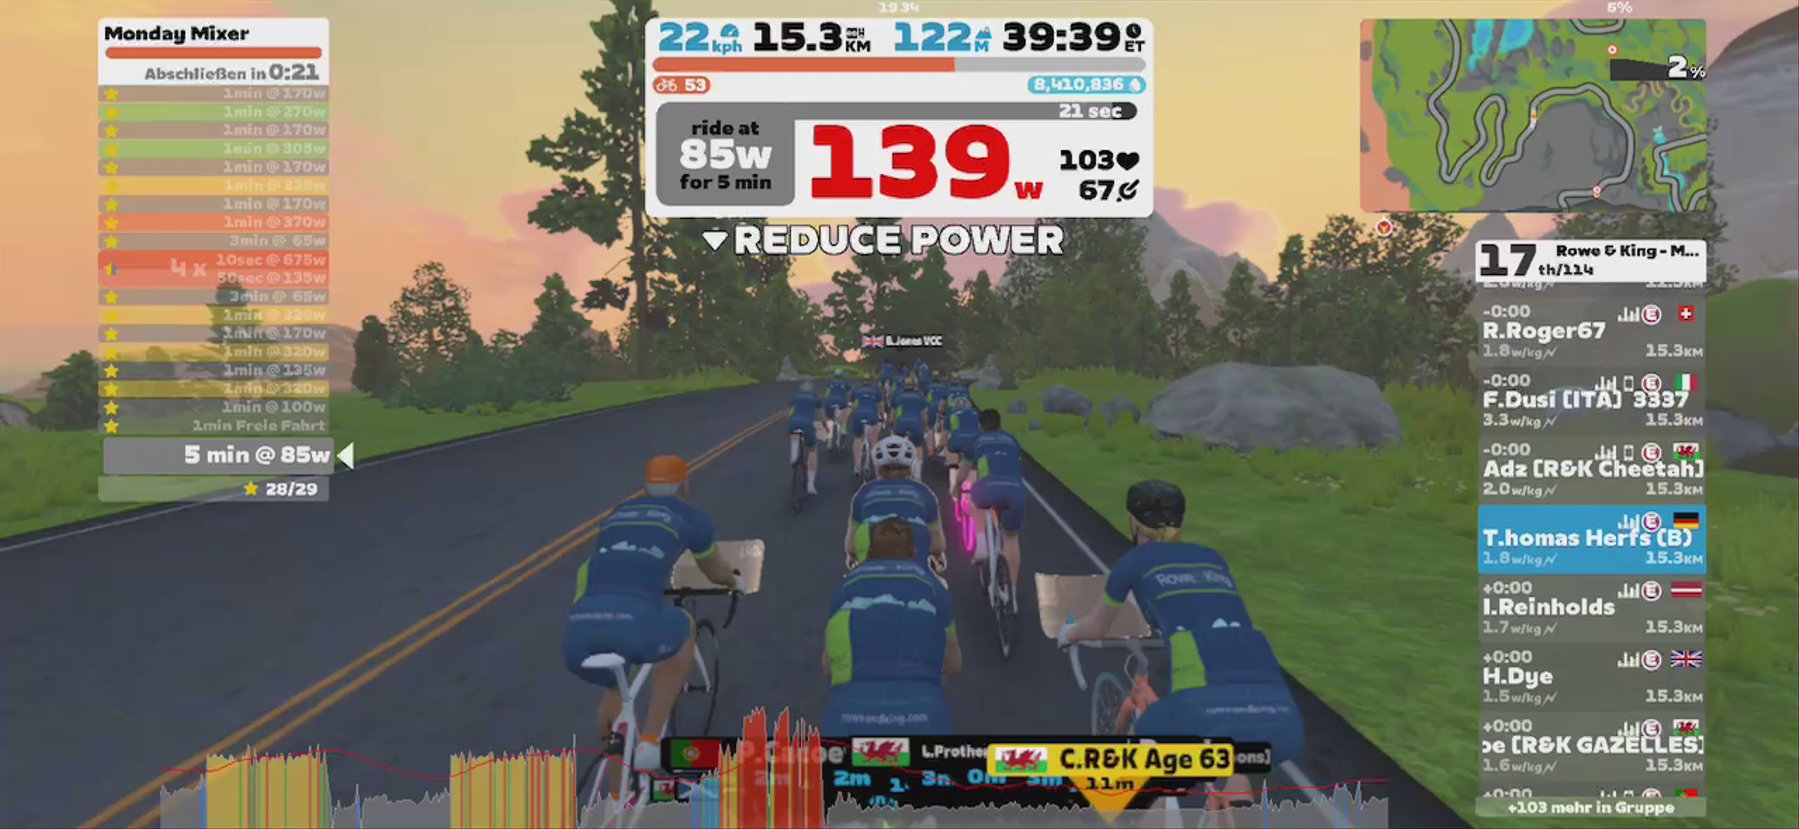 Zwift - Group Workout: Rowe & King - Monday Mixer (E) on Sand And Sequoias in Watopia